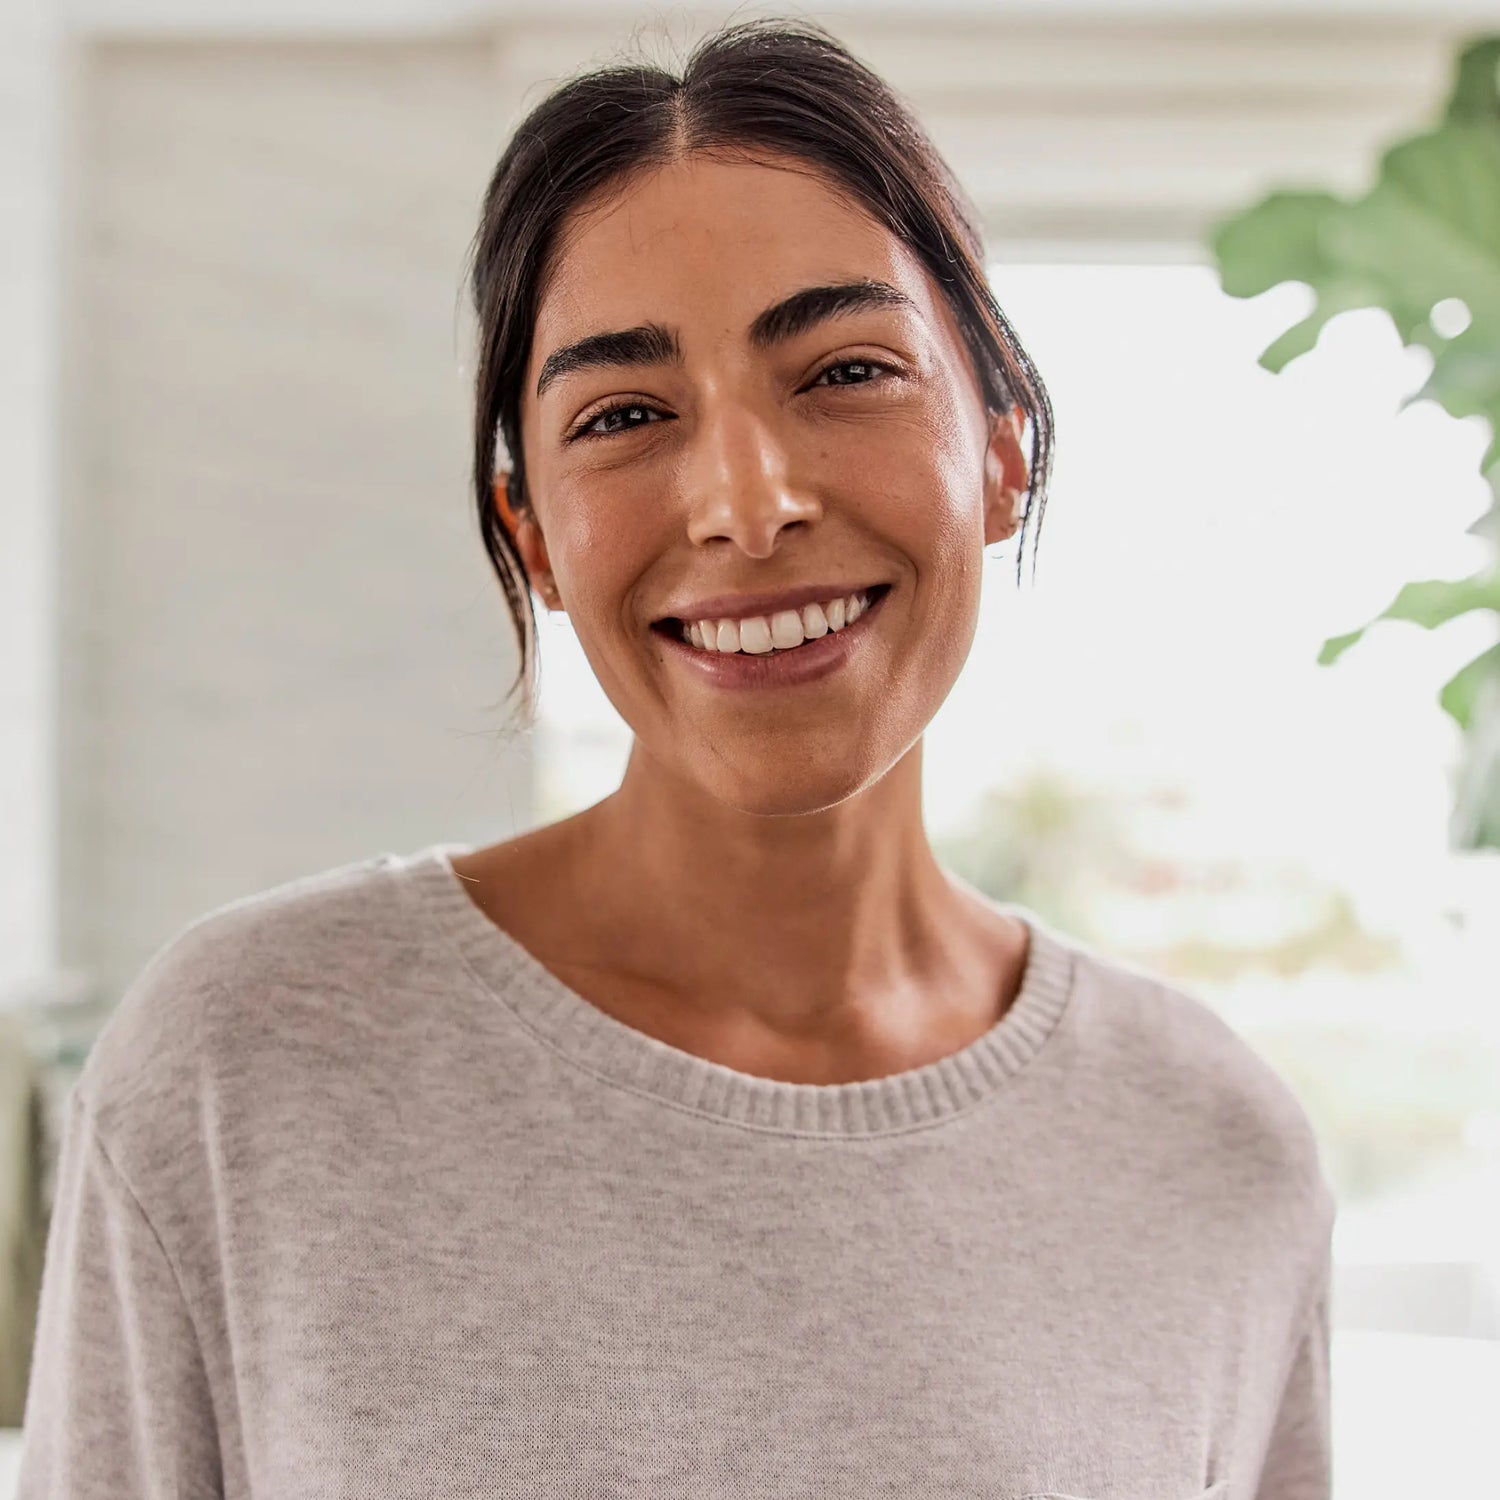 Woman smiling after using her proclaim oral health system